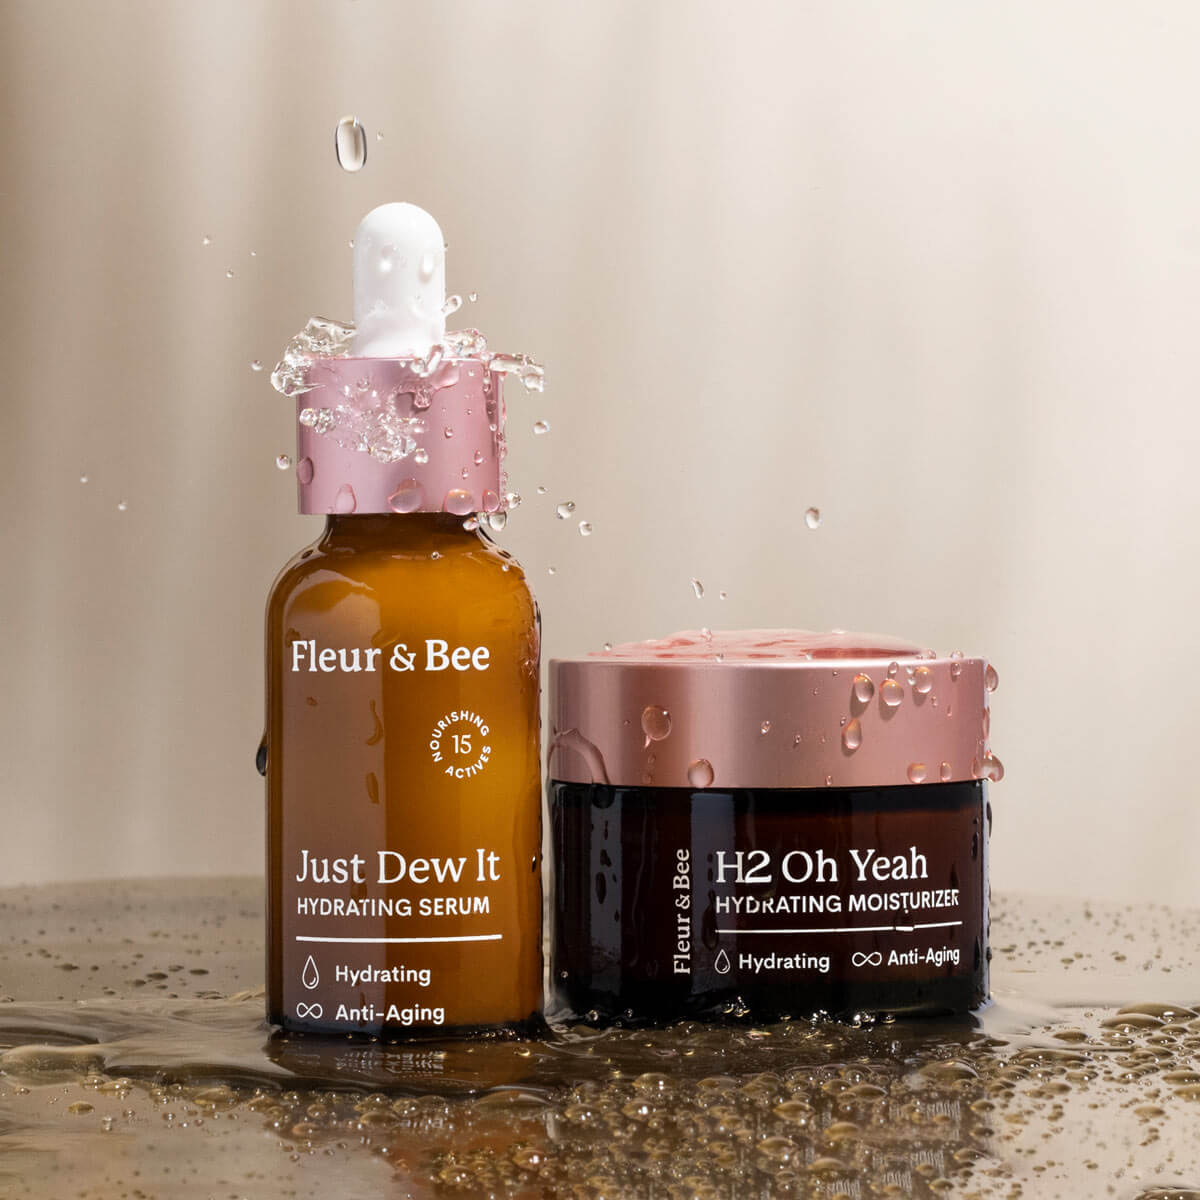 hydrating serum and hydrating moisturizer shown in a wet environment